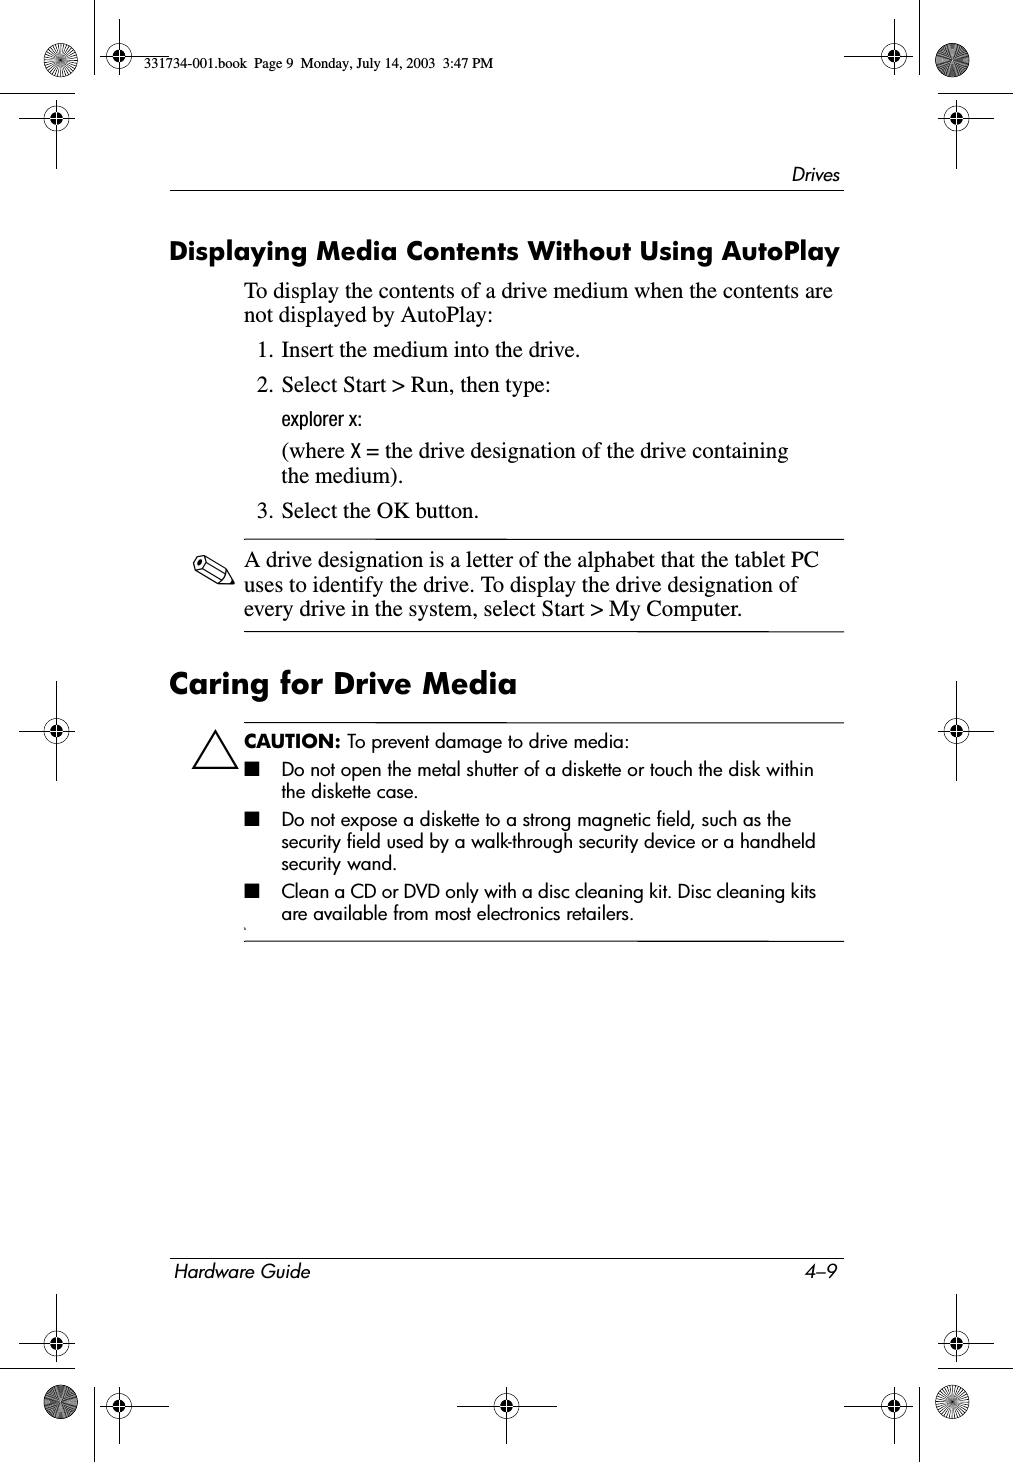 DrivesHardware Guide 4–9Displaying Media Contents Without Using AutoPlayTo display the contents of a drive medium when the contents are not displayed by AutoPlay:1. Insert the medium into the drive.2. Select Start &gt; Run, then type:explorer x:(where X = the drive designation of the drive containing the medium).3. Select the OK button.✎A drive designation is a letter of the alphabet that the tablet PC uses to identify the drive. To display the drive designation of every drive in the system, select Start &gt; My Computer.Caring for Drive MediaÄCAUTION: To prevent damage to drive media:■Do not open the metal shutter of a diskette or touch the disk within the diskette case.■Do not expose a diskette to a strong magnetic field, such as the security field used by a walk-through security device or a handheld security wand.■Clean a CD or DVD only with a disc cleaning kit. Disc cleaning kits are available from most electronics retailers.\\331734-001.book  Page 9  Monday, July 14, 2003  3:47 PM